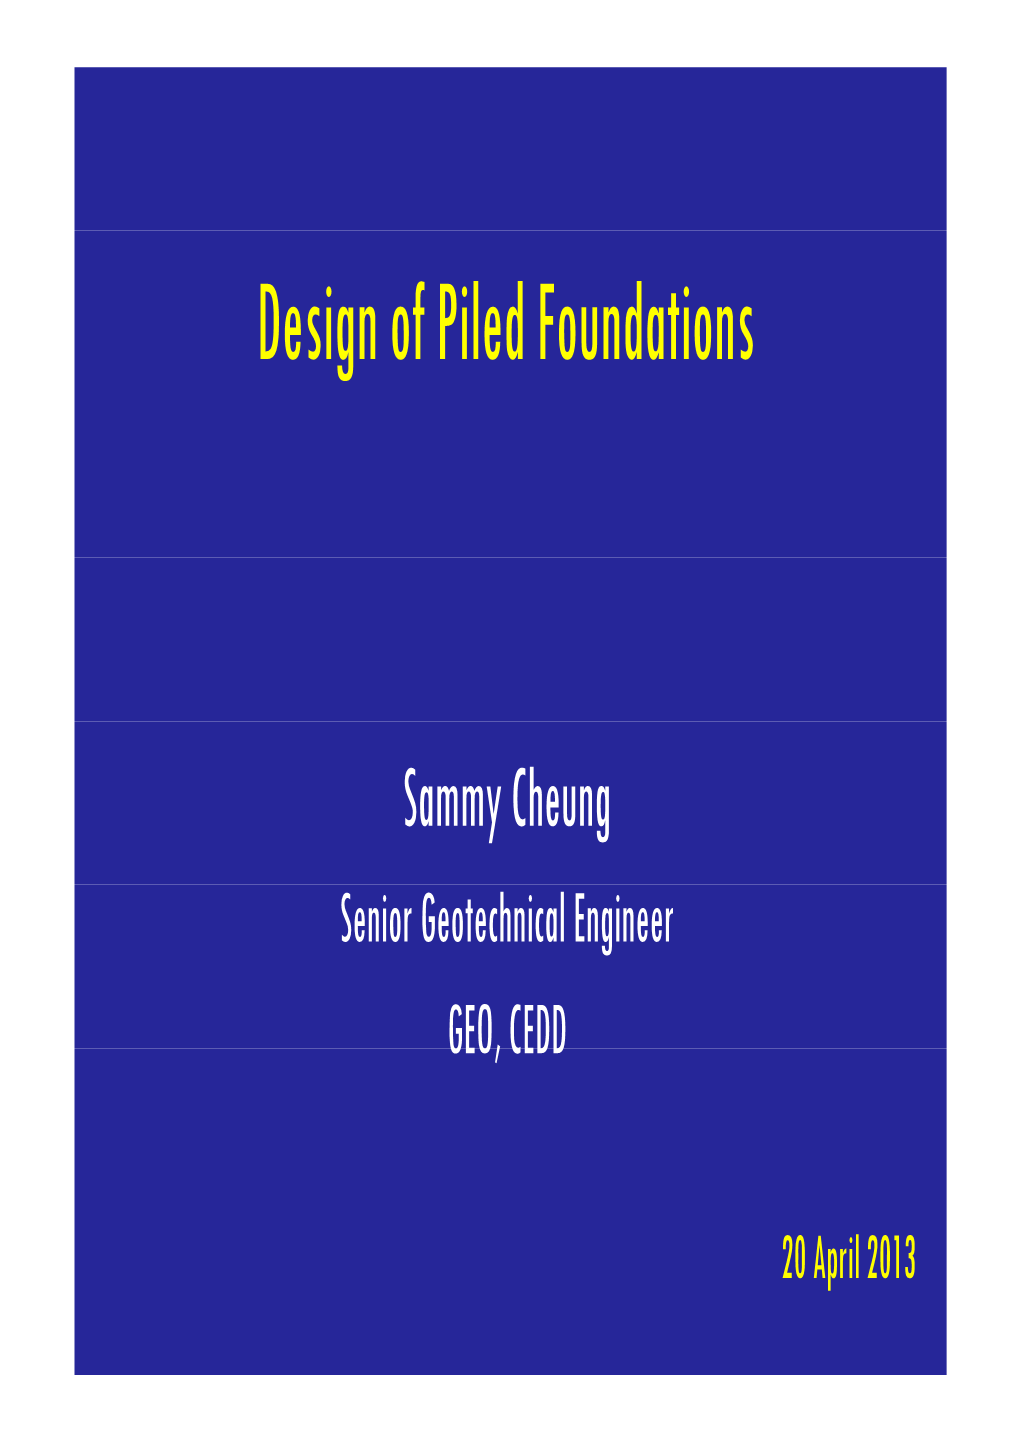 Design of Piled Foundations